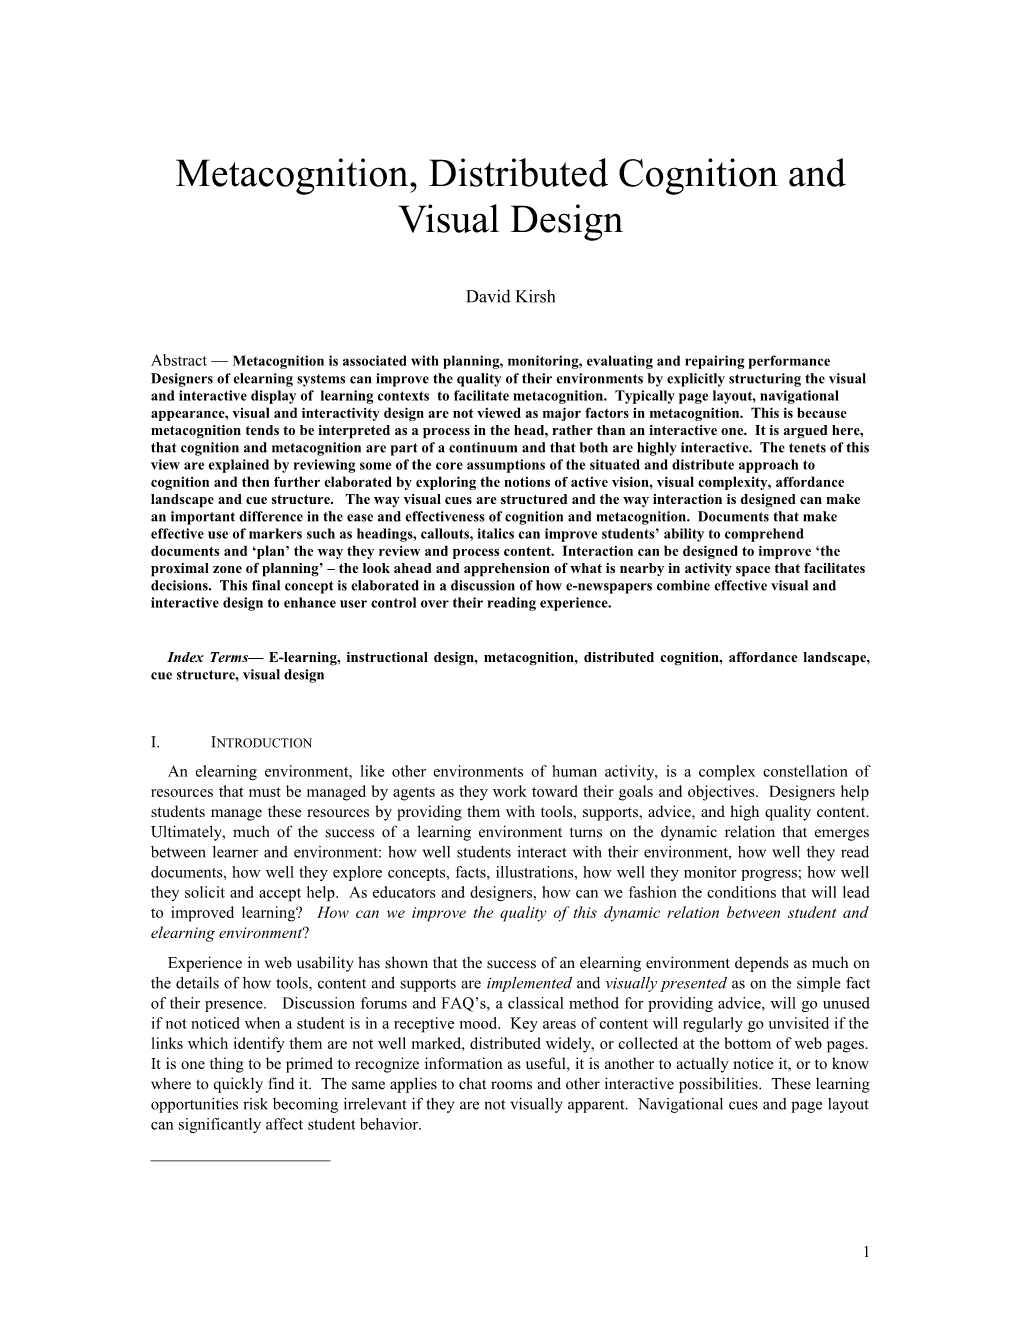 Metacognition, Distributed Cognition and Visual Design